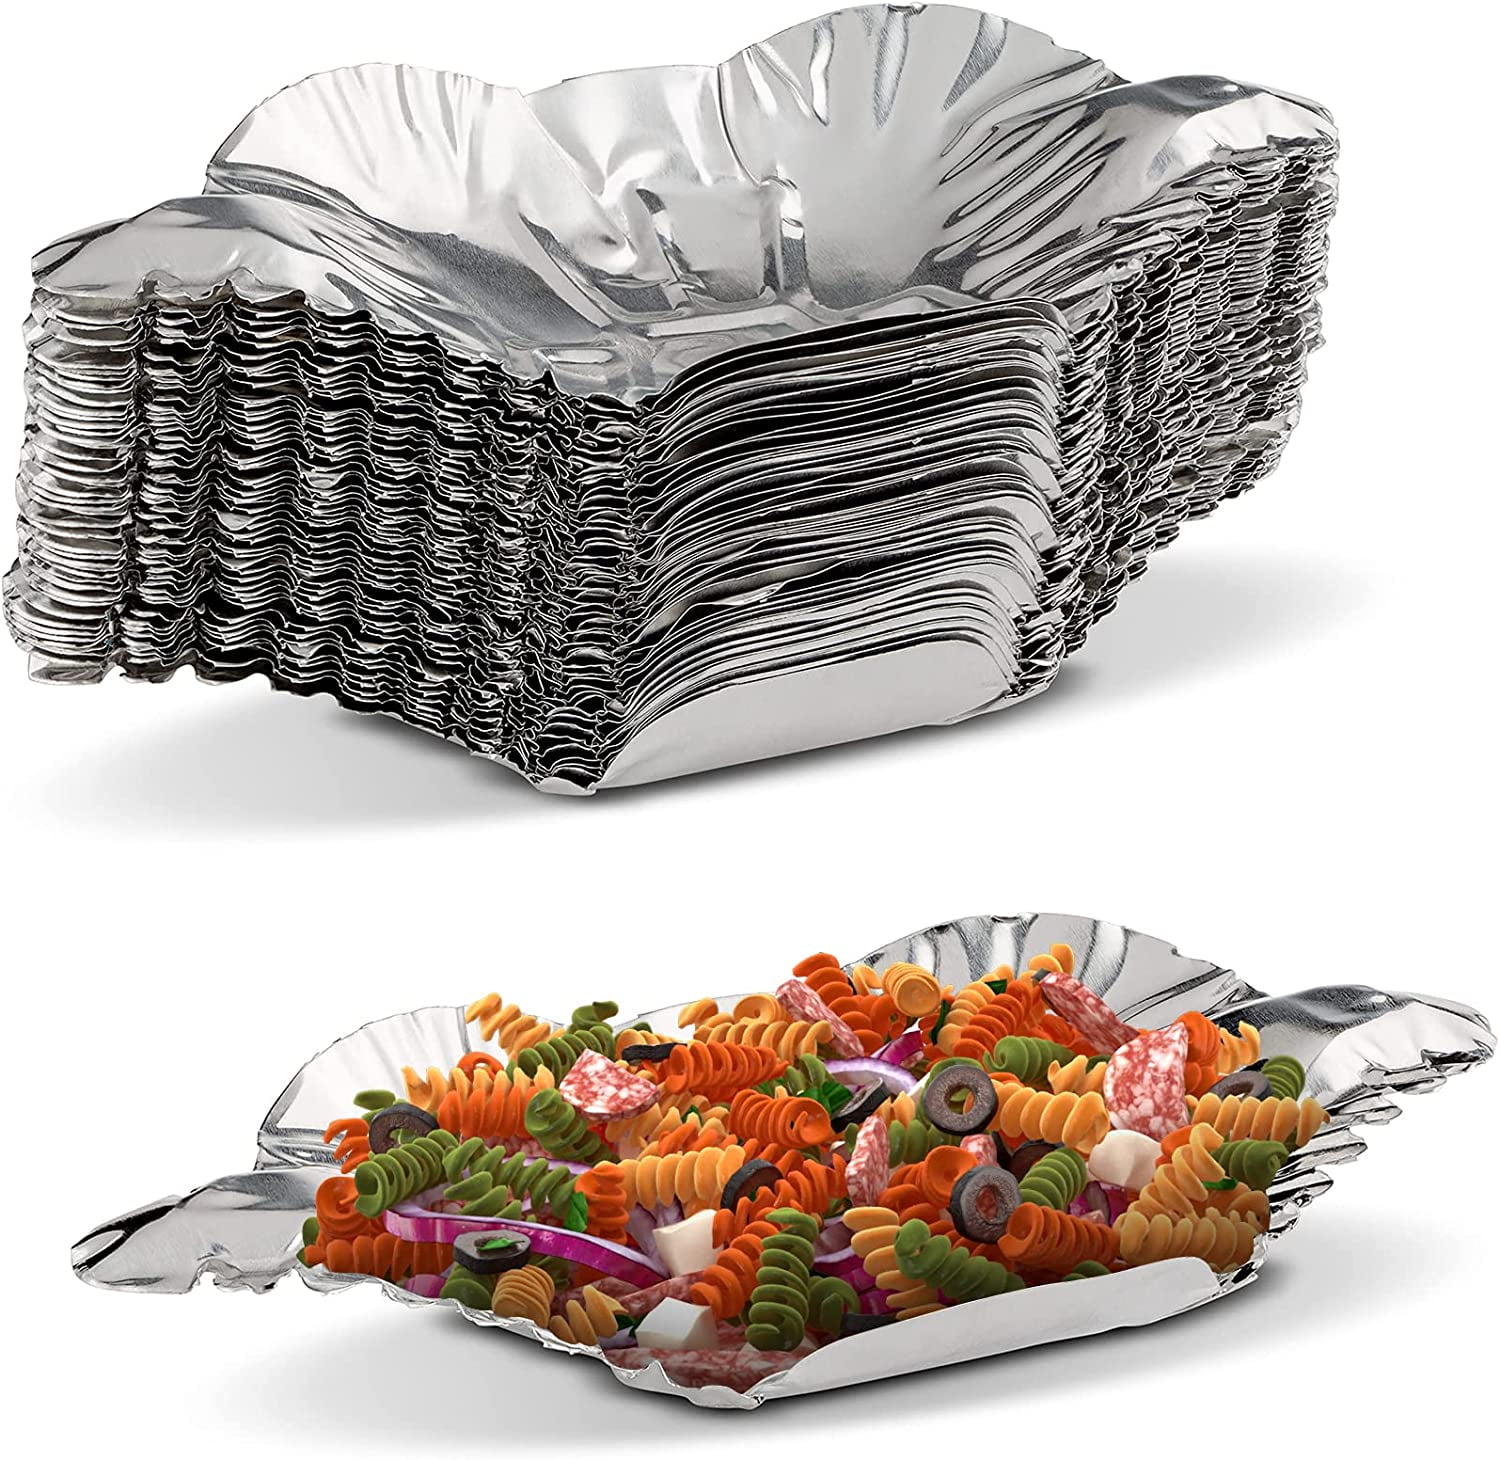 Disposable Aluminum 4 Compartment TV Dinner Trays with Board Lid by  Handi-Foil #4145L (10)